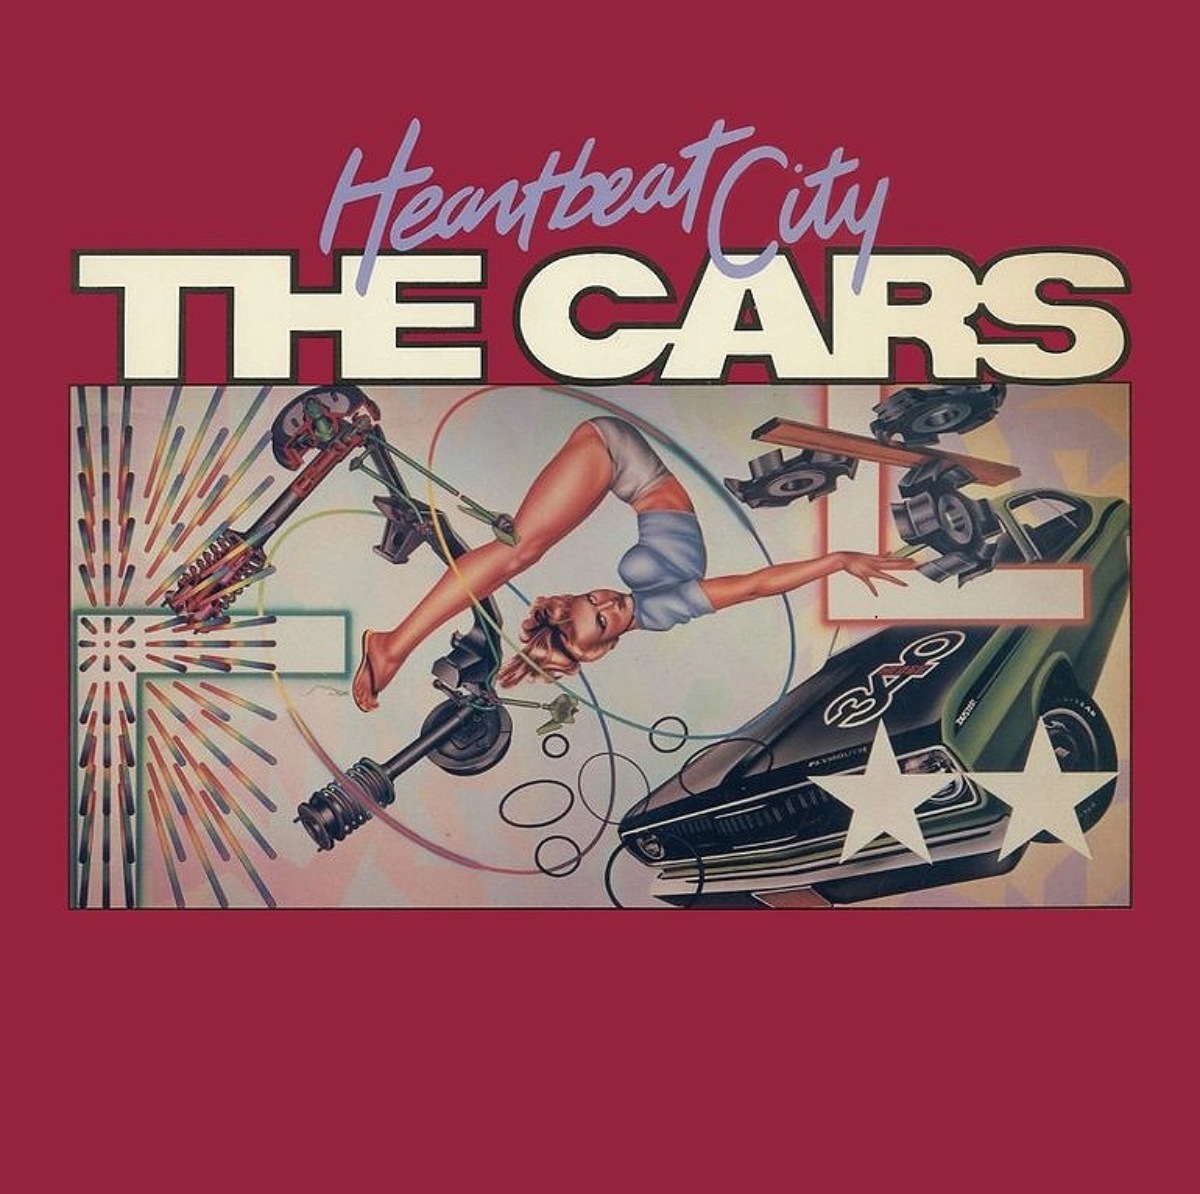 The cover of "Heartbeat City" by The Cars